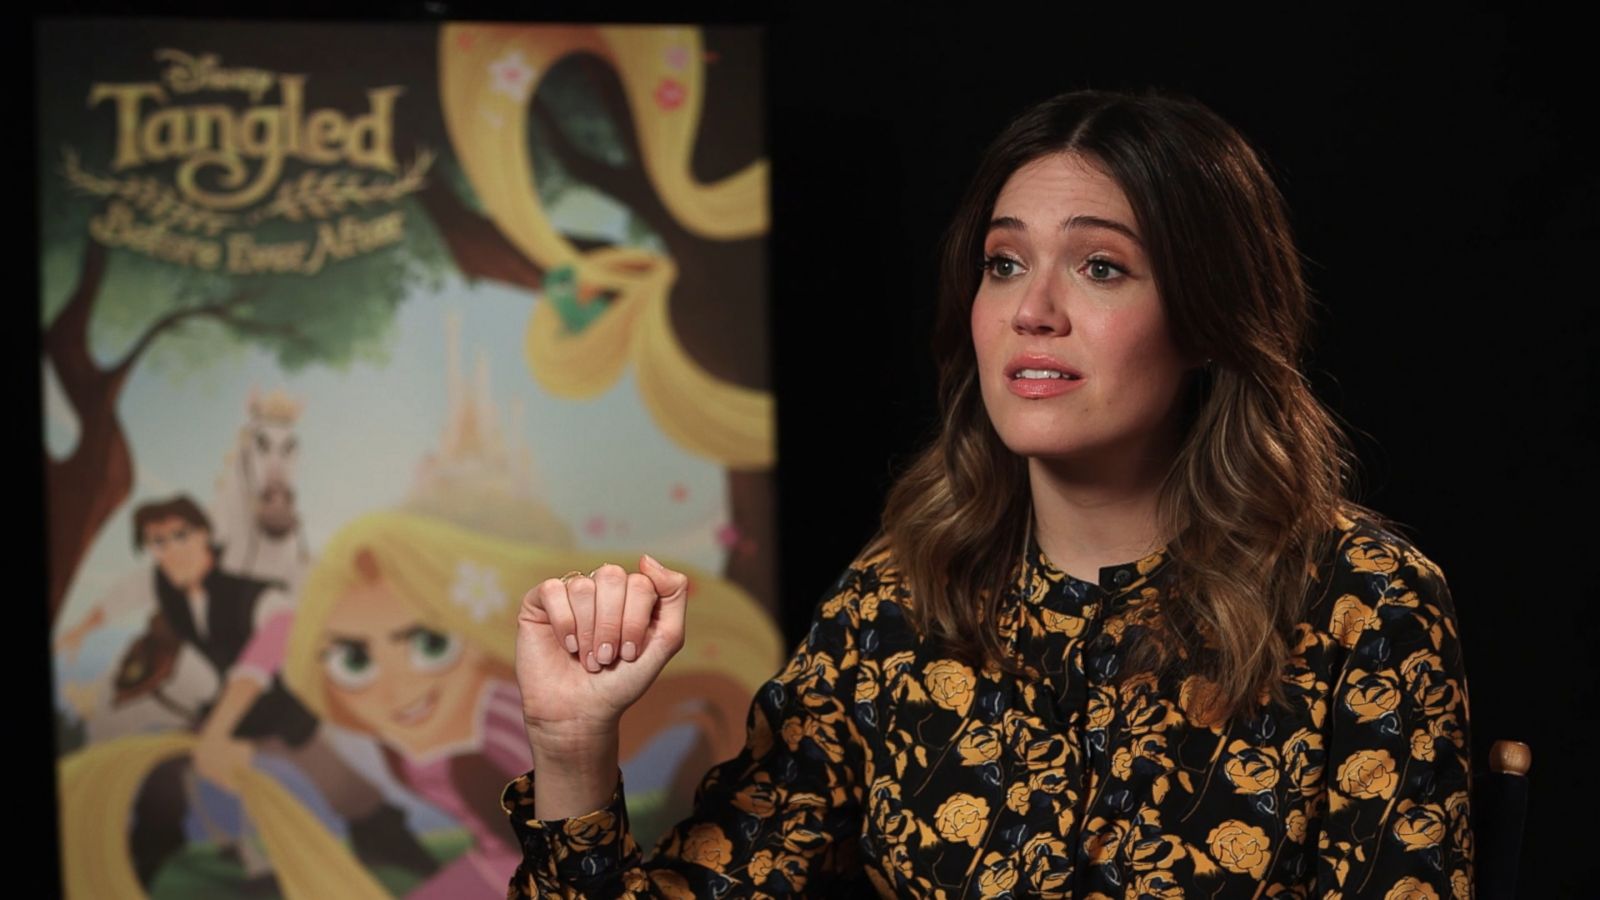 Mandy Moore Talks About Recording The Voice Of Rapunzel Good Morning America 